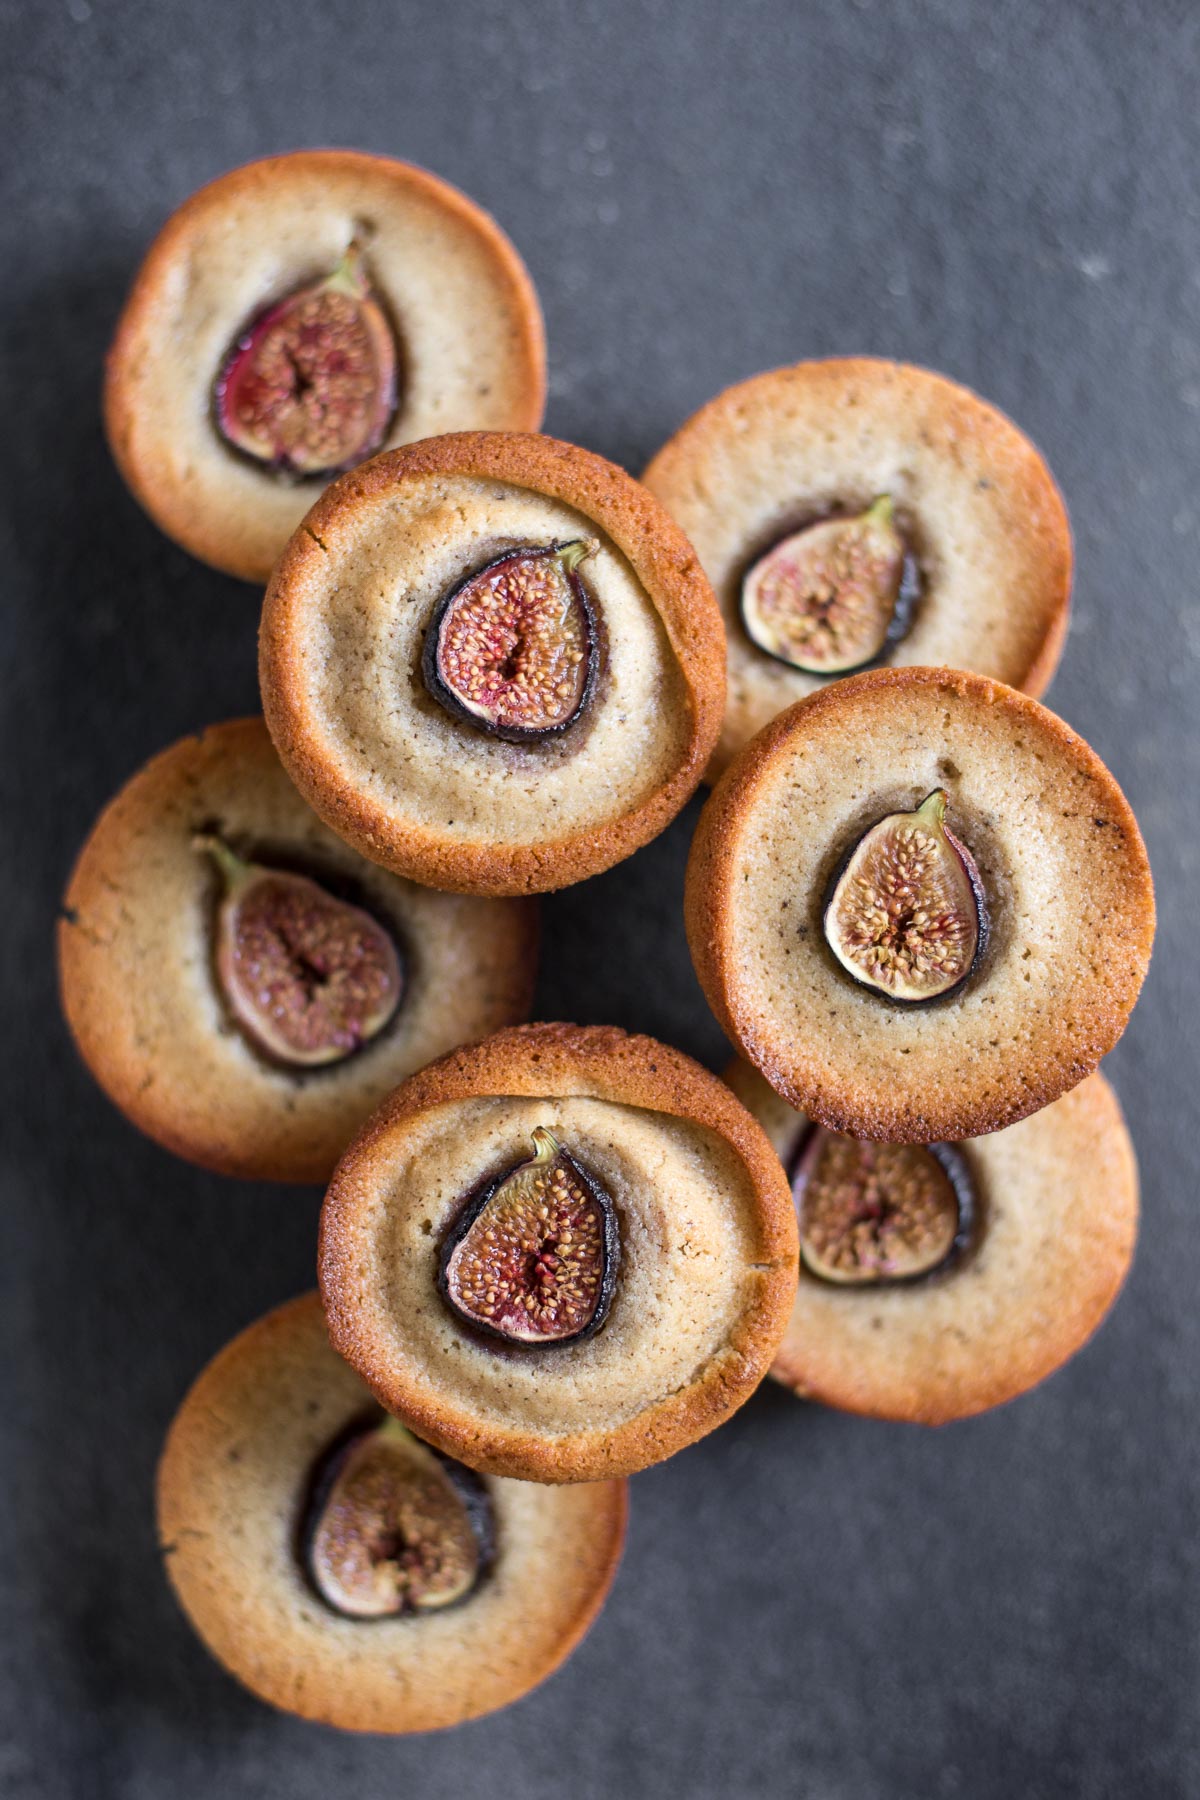 Gluten-free Financiers with Figs made with brown butter and almond flour (Grain free)